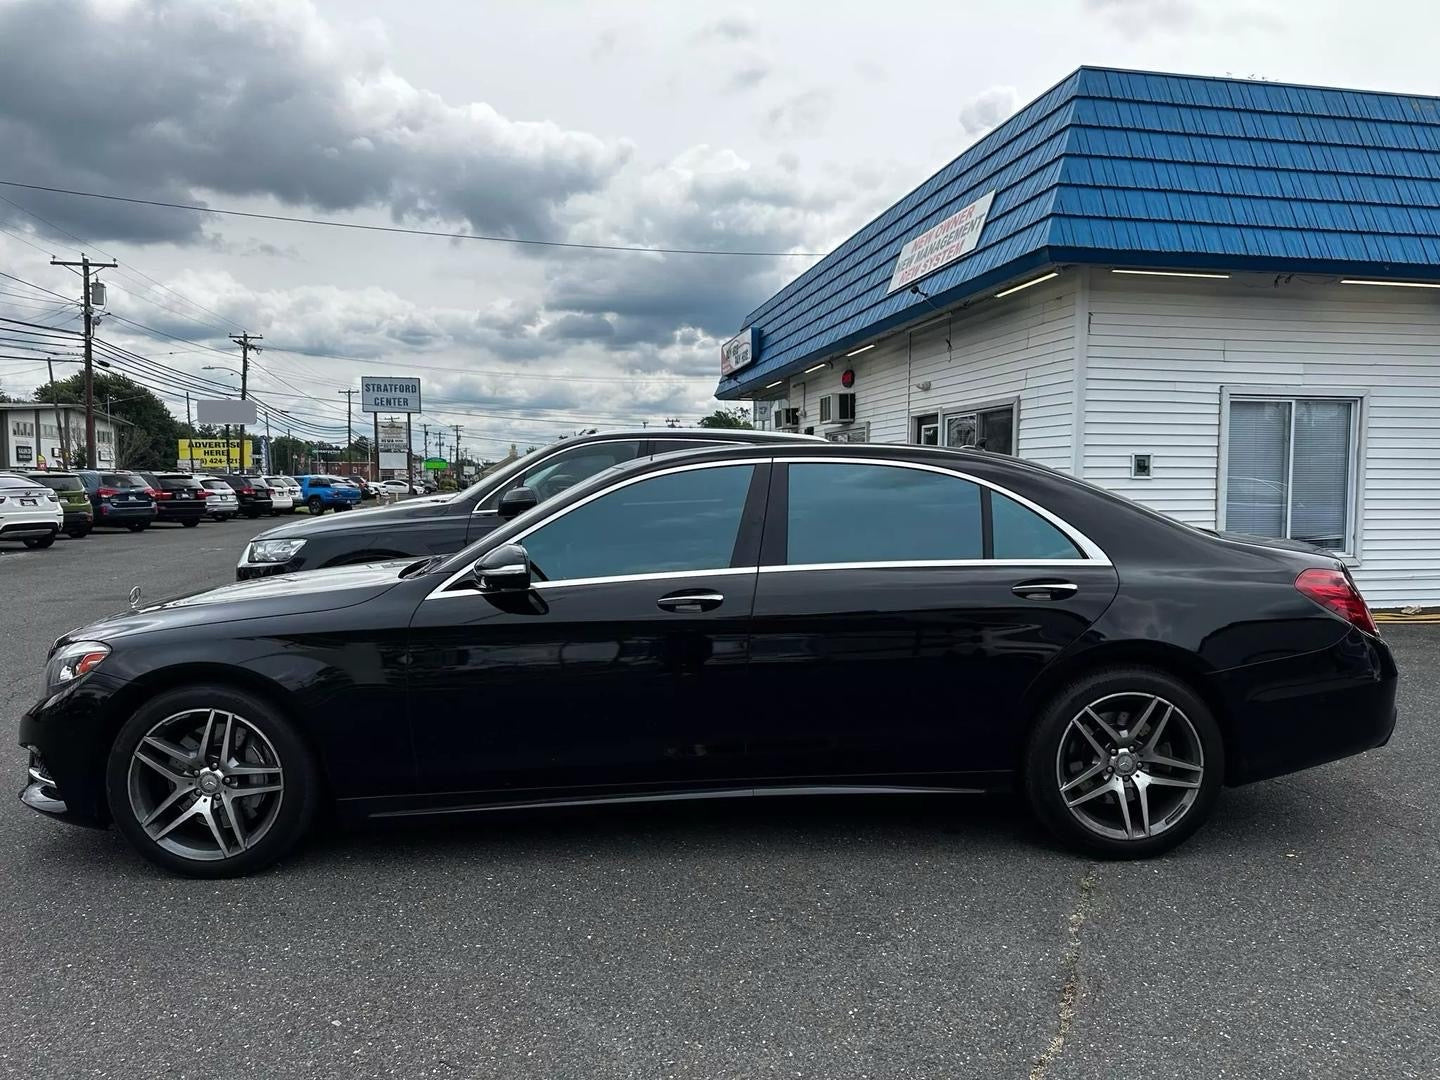 2015 MERCEDES-BENZ S-CLASS $1500 DOWN & DRIVE IN 1 HOUR!